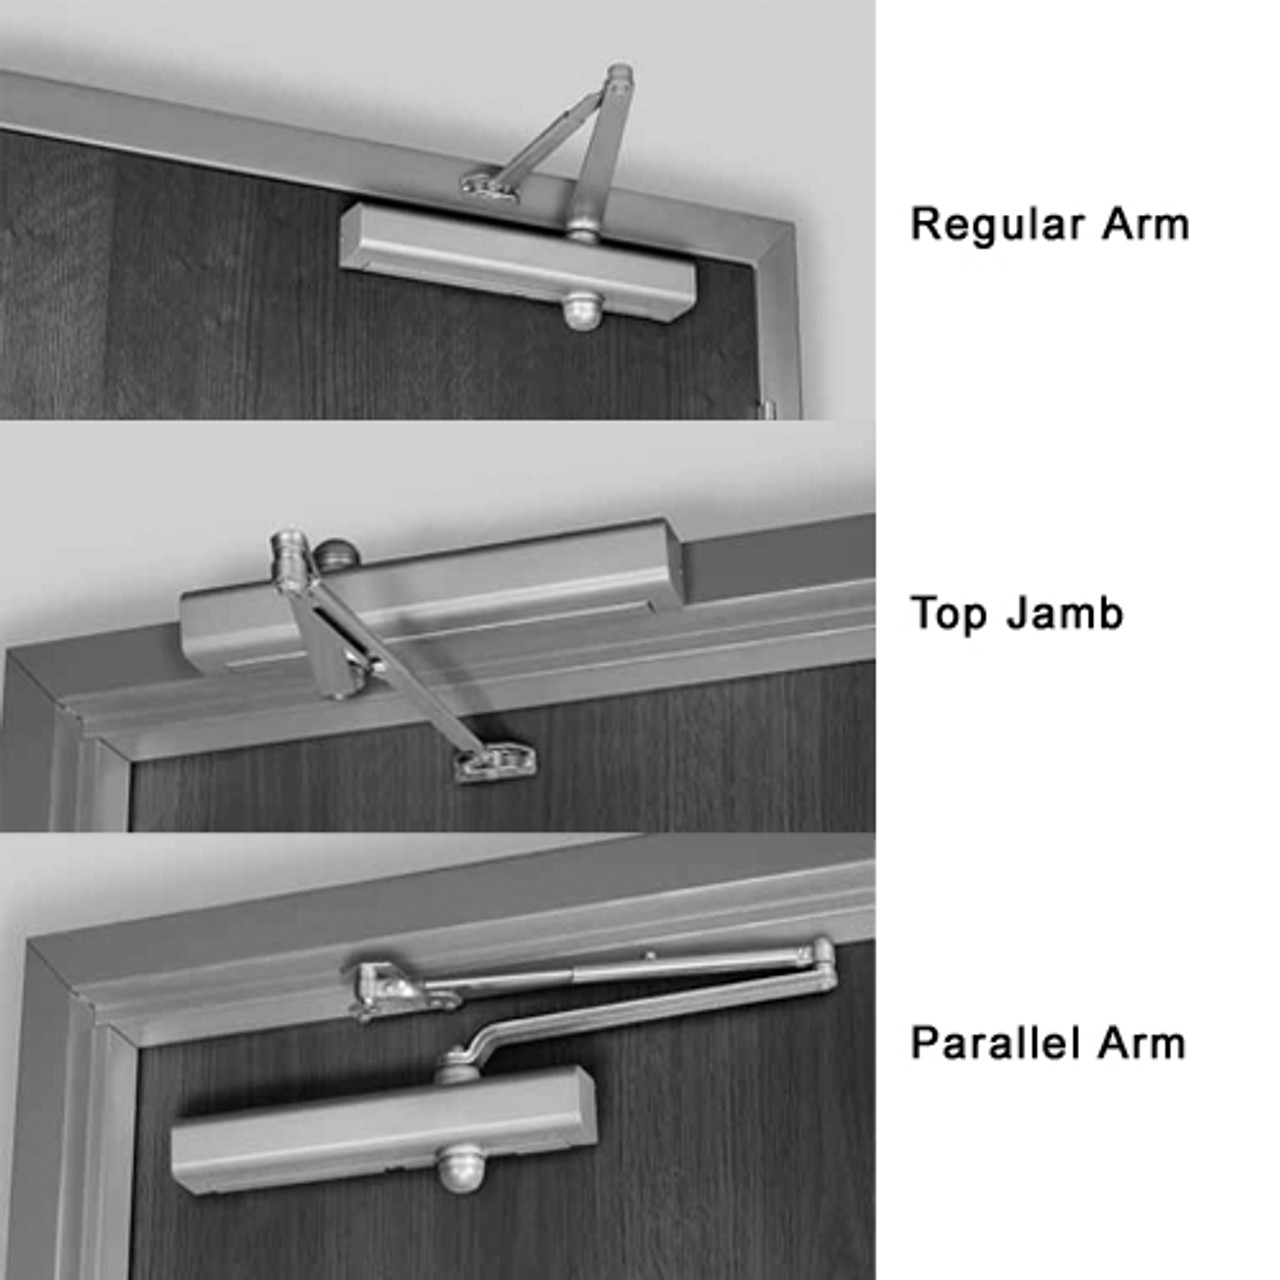 8301DA-696 Norton 8000 Series Non-Hold Open Door Closers with Regular Parallel and Top Jamb to 3 inch Reveal in Gold Finish